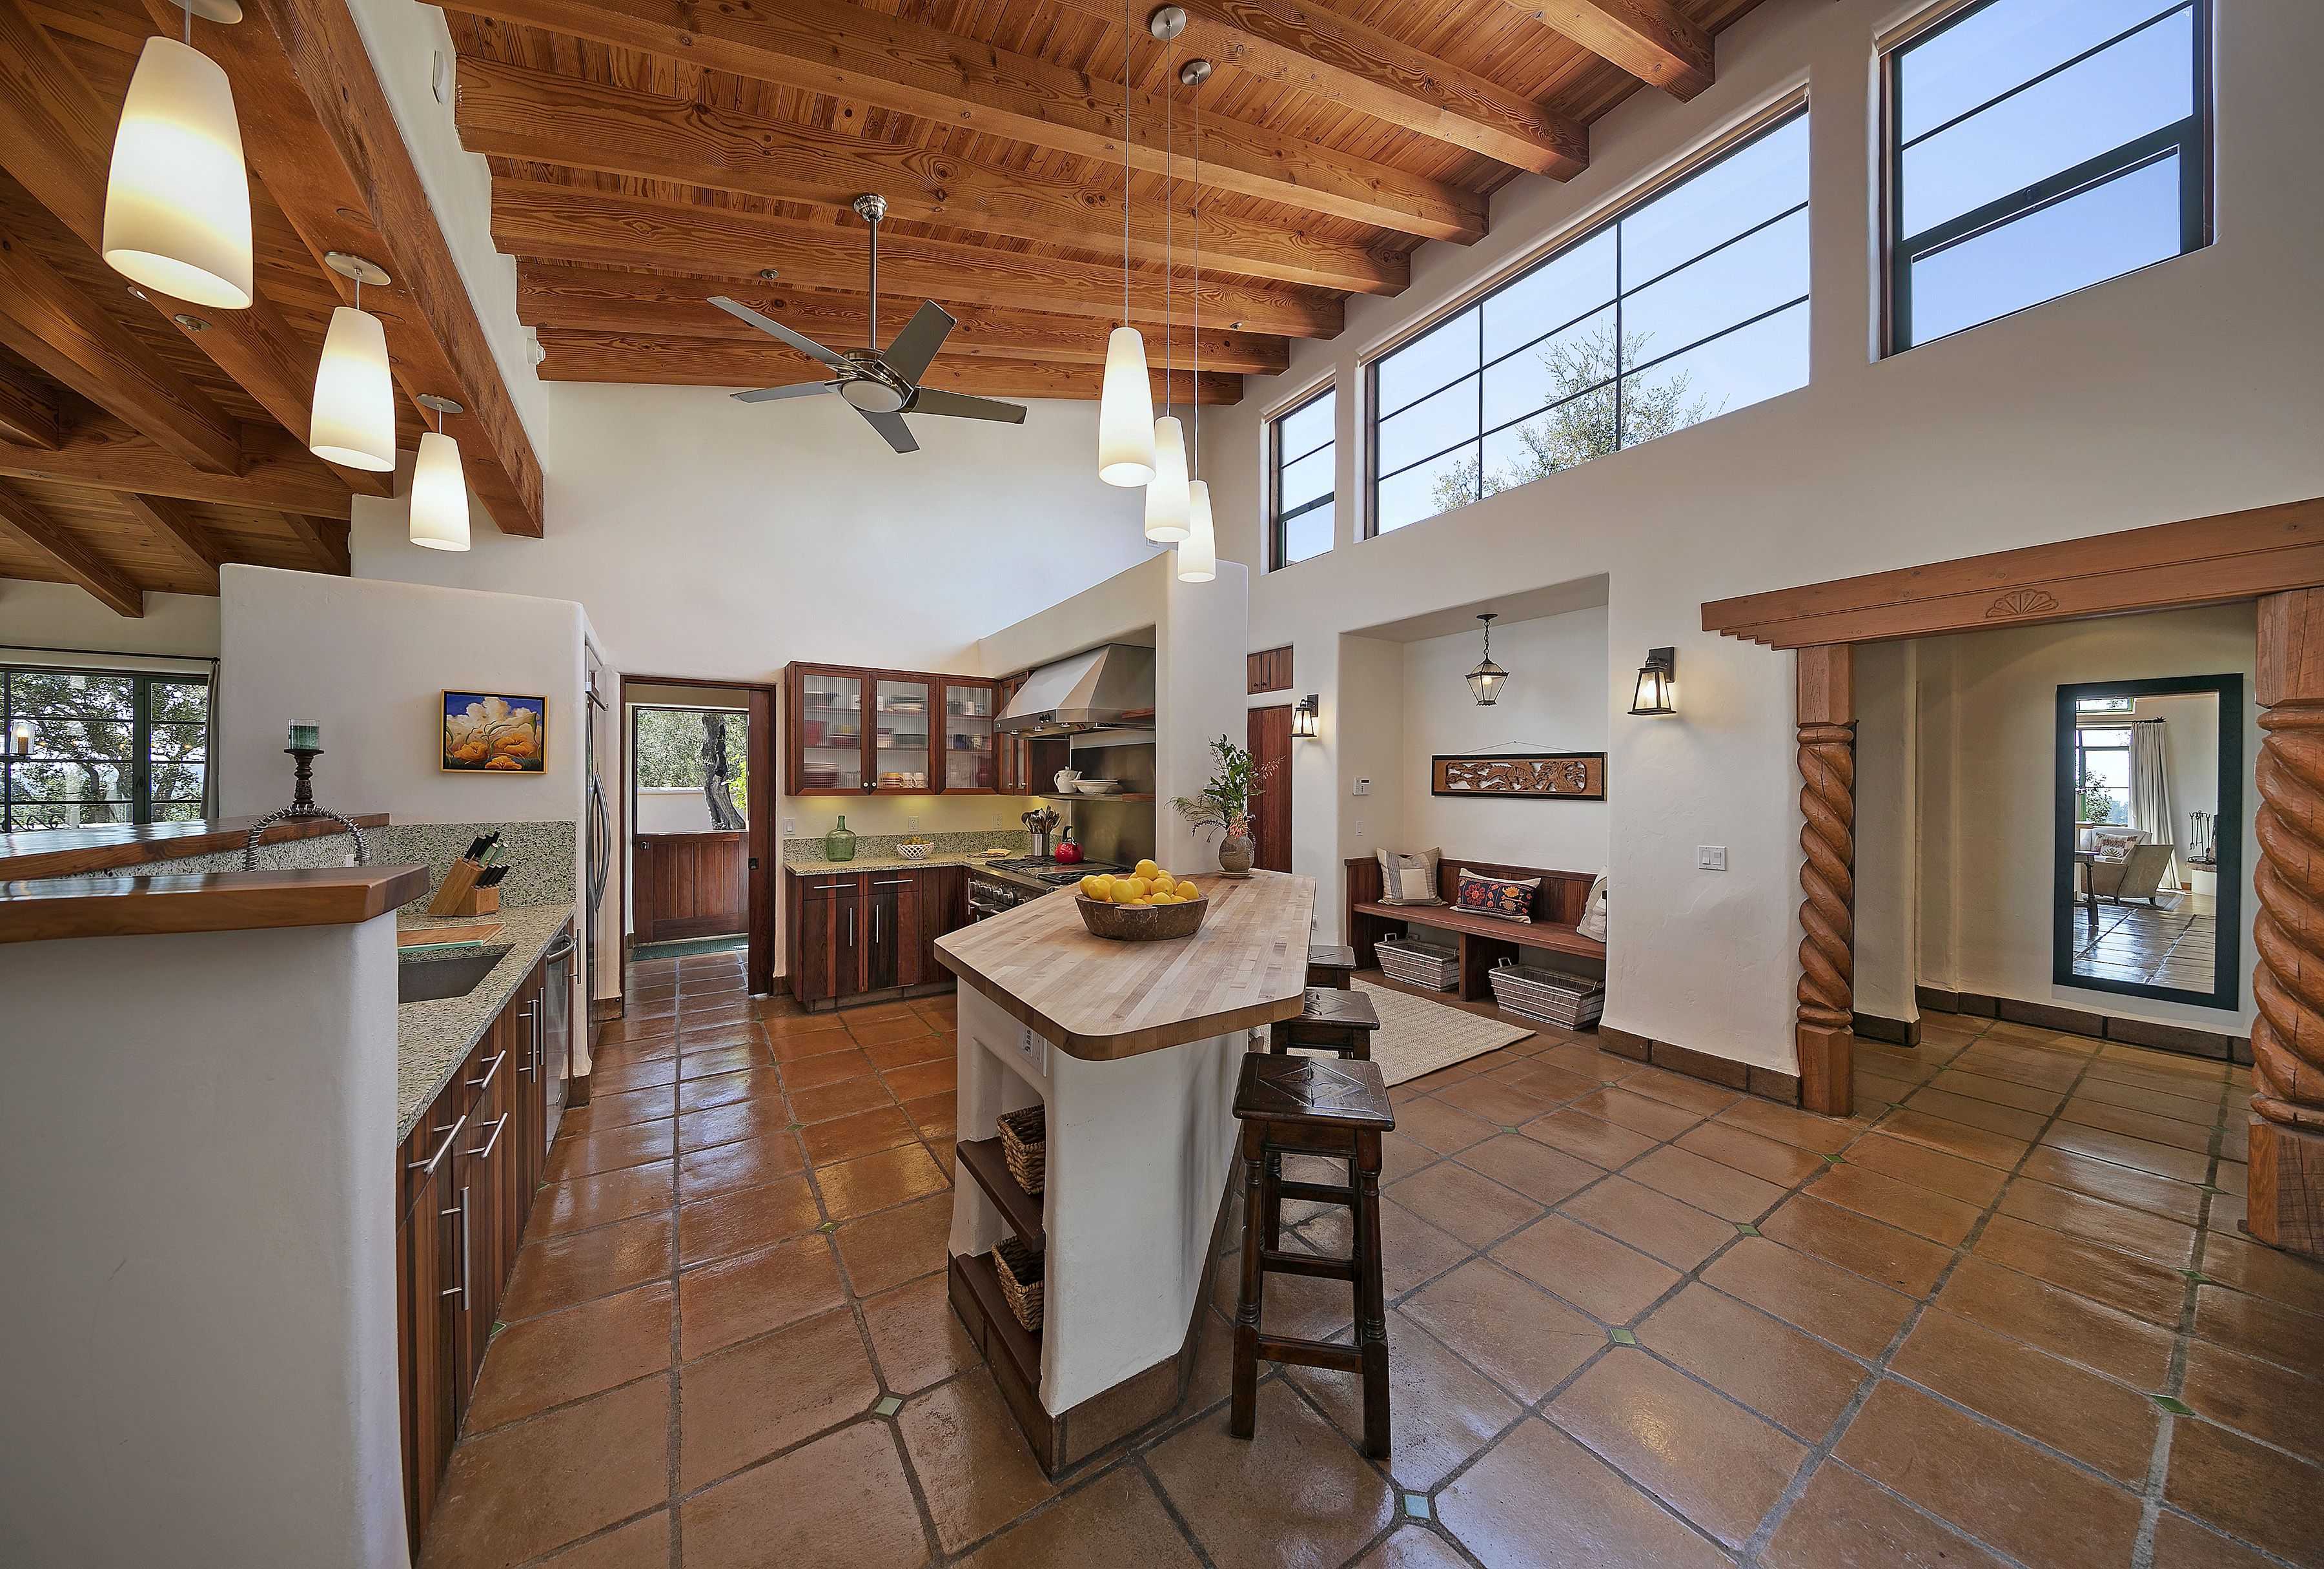 Luxurious kitchen with Saltillo-tiled floor, a beamed ceiling, and clerestory windows